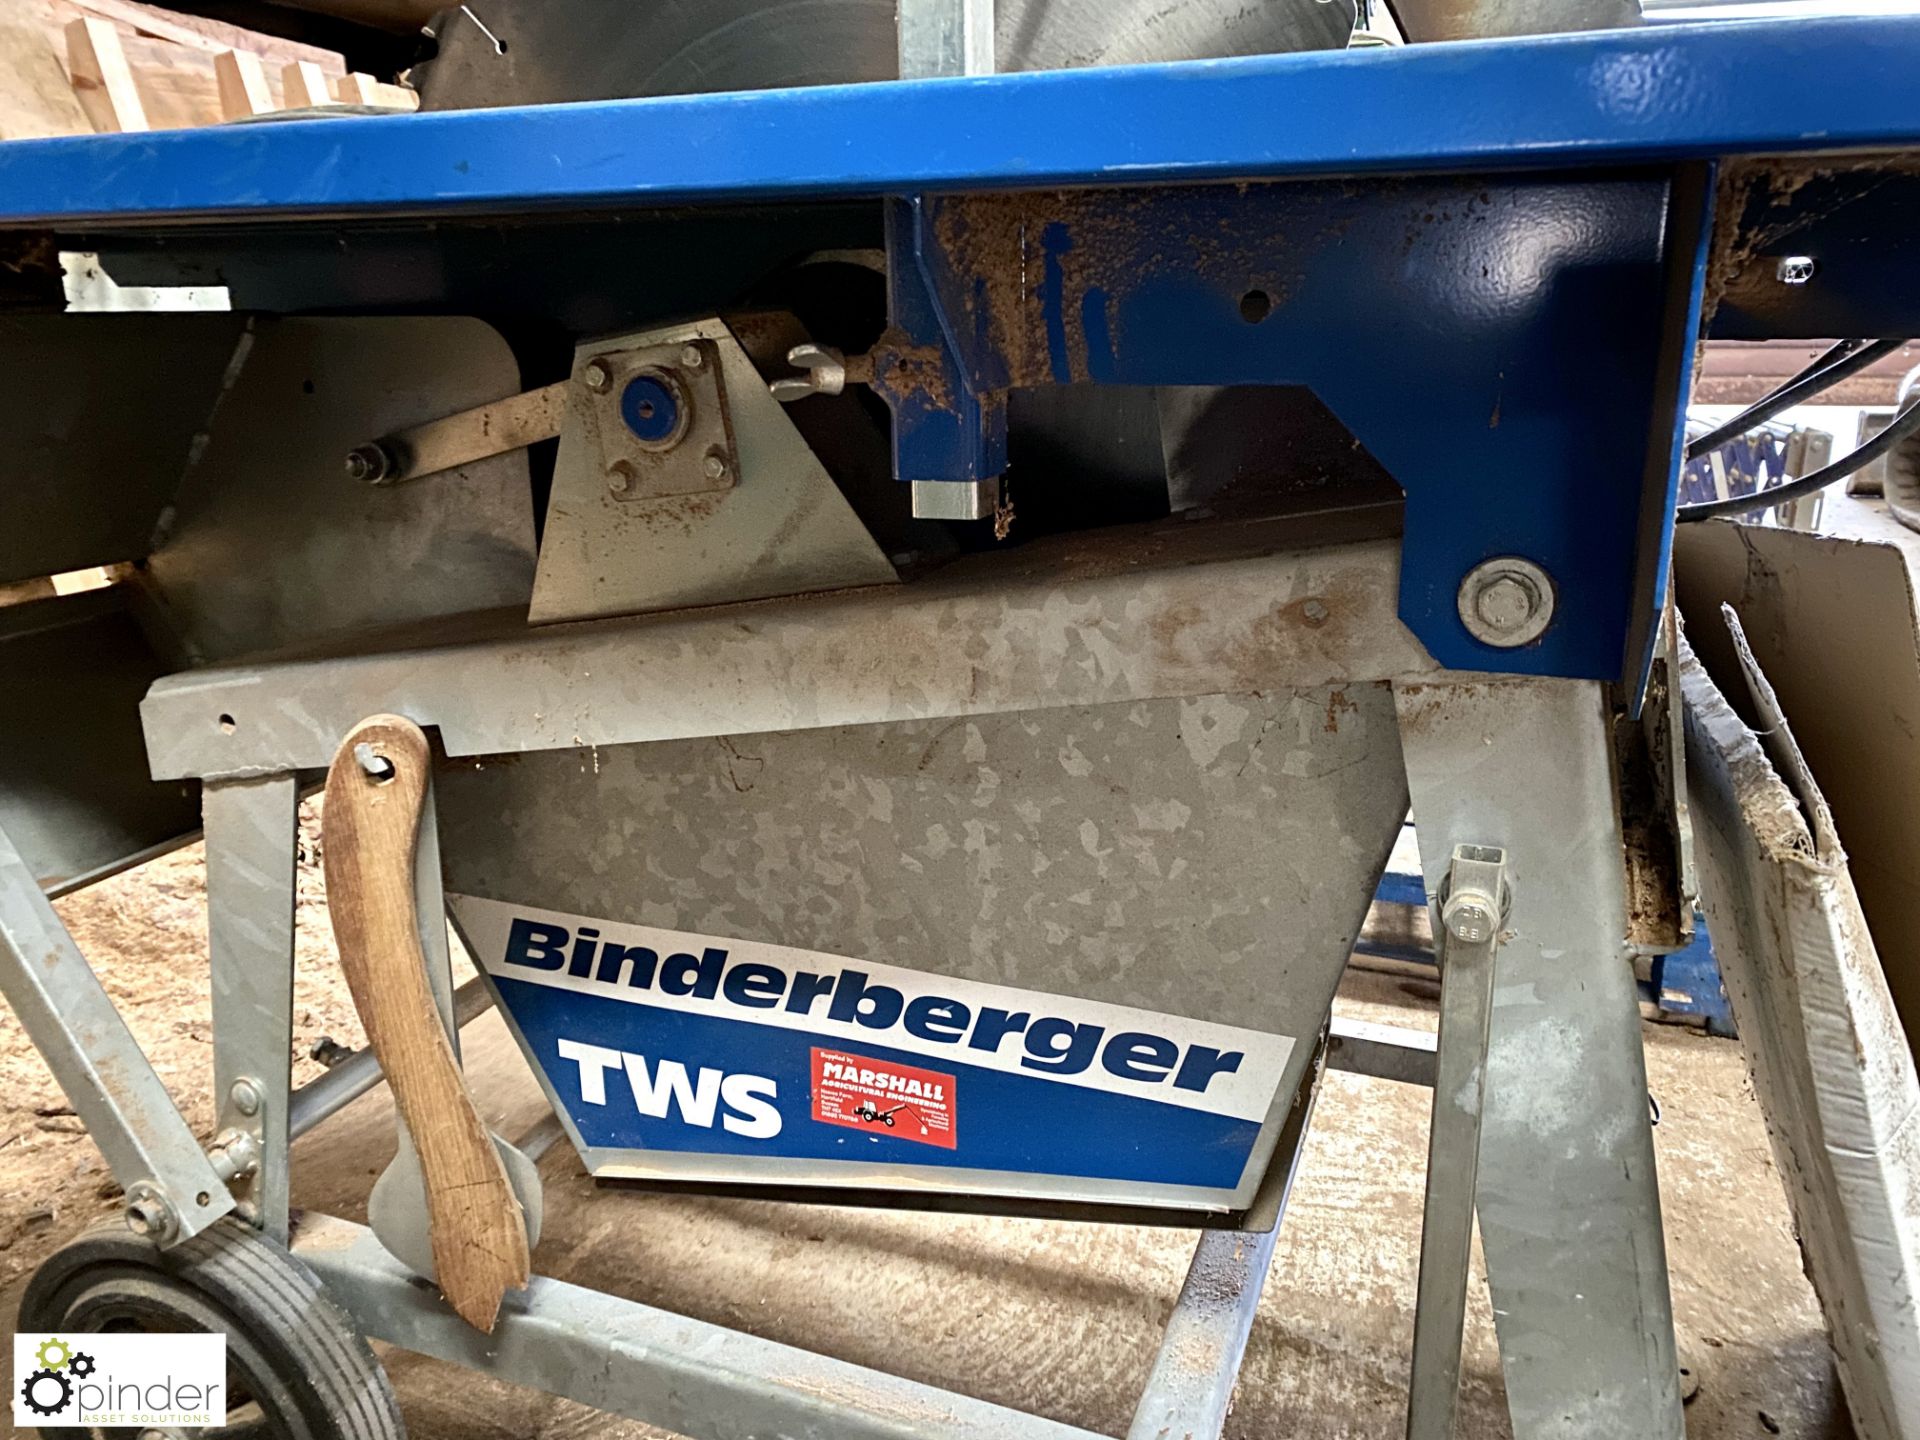 Binderberger TWS 700E mobile Circular Saw Bench, 415volts, with spare used saw blade (motor and - Image 3 of 7